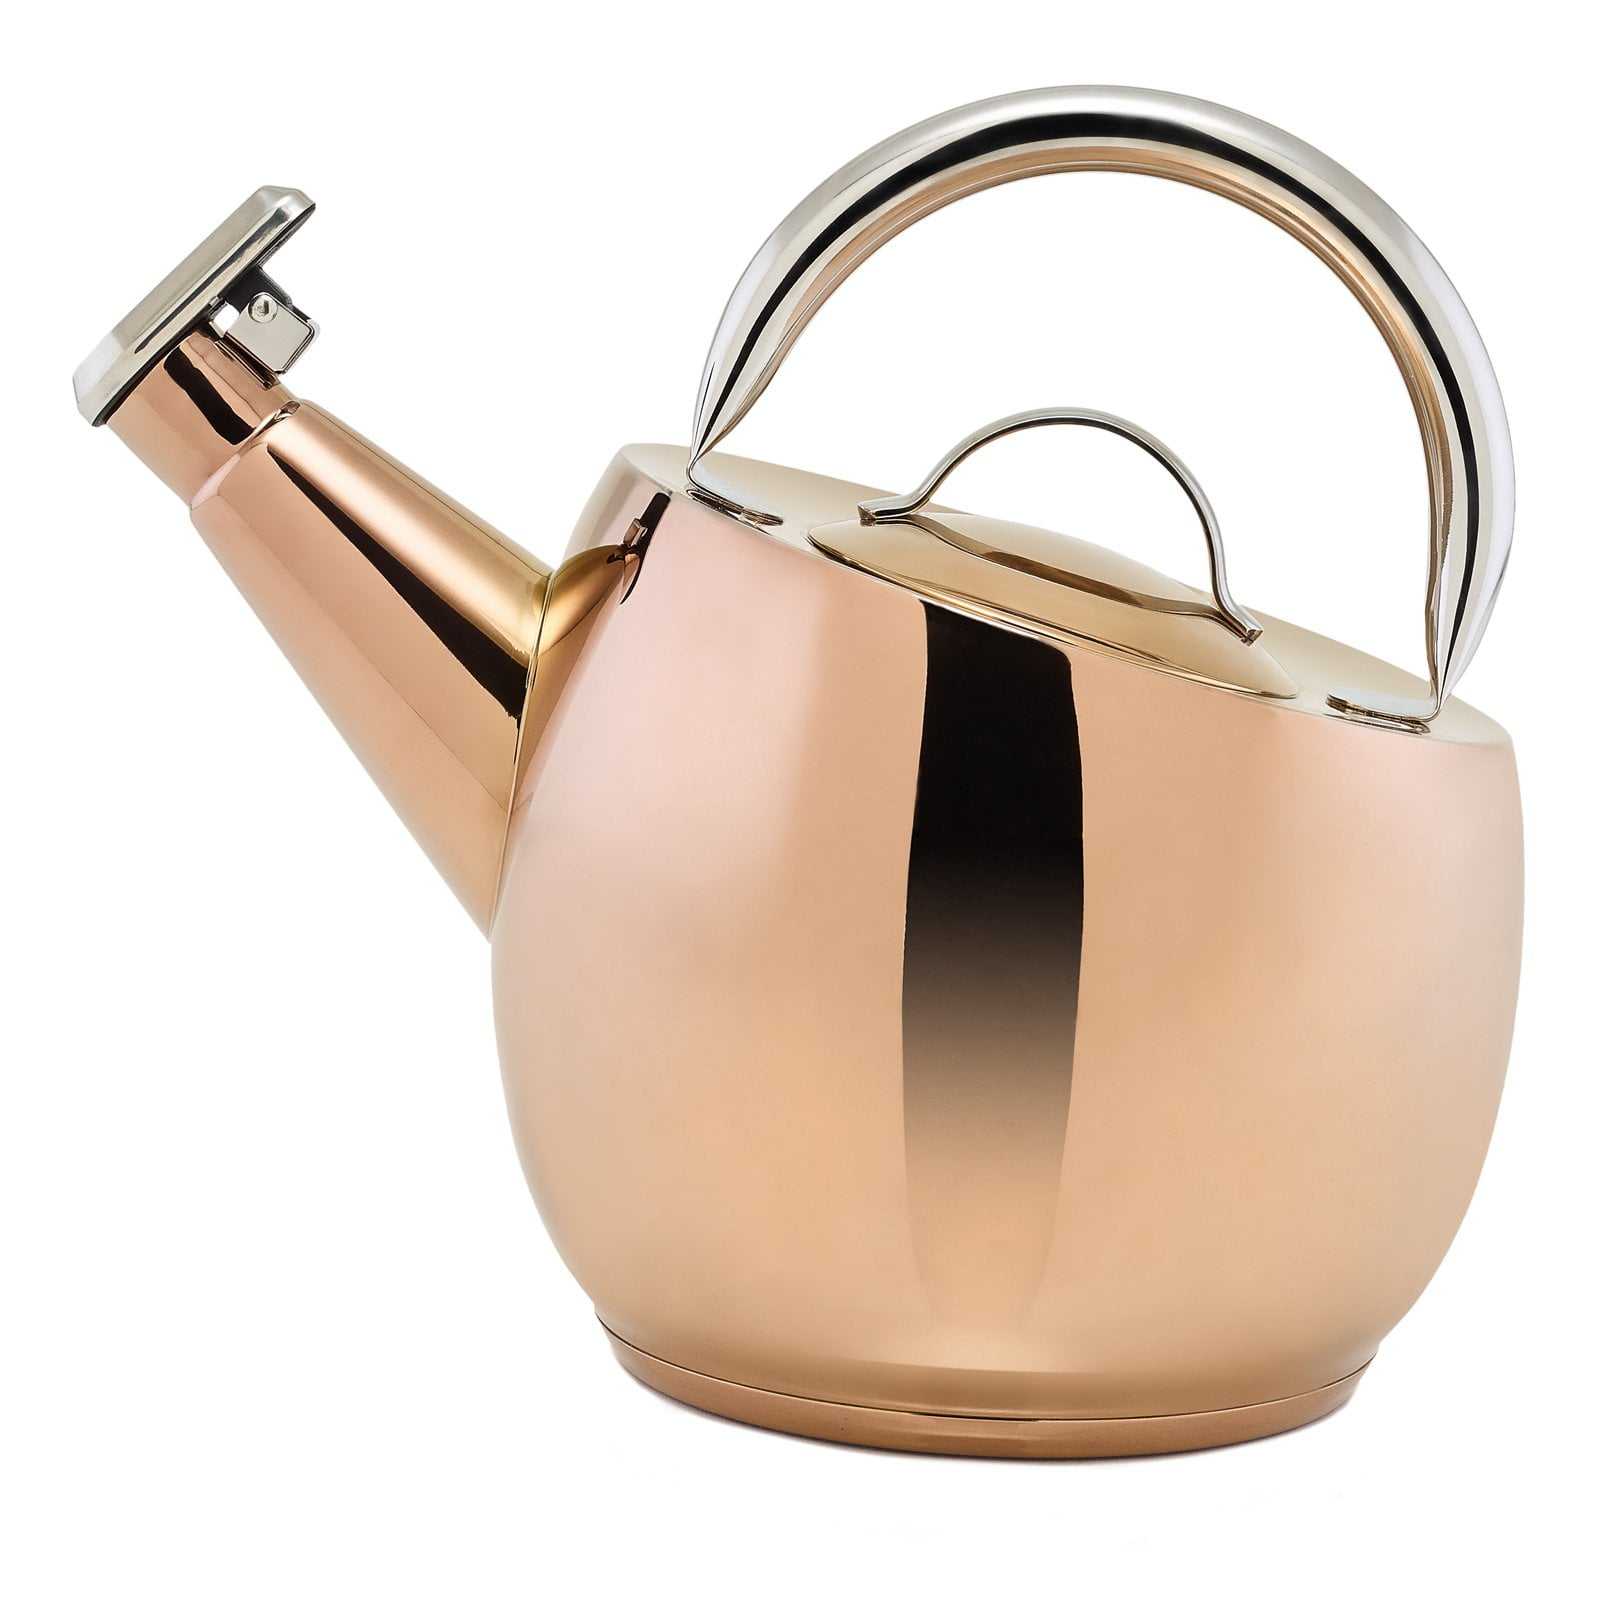 Old Dutch 2 qt. Solid Copper Hammered Tea Kettle with Wood Handle -  Replacement for # 552 - Walmart.com